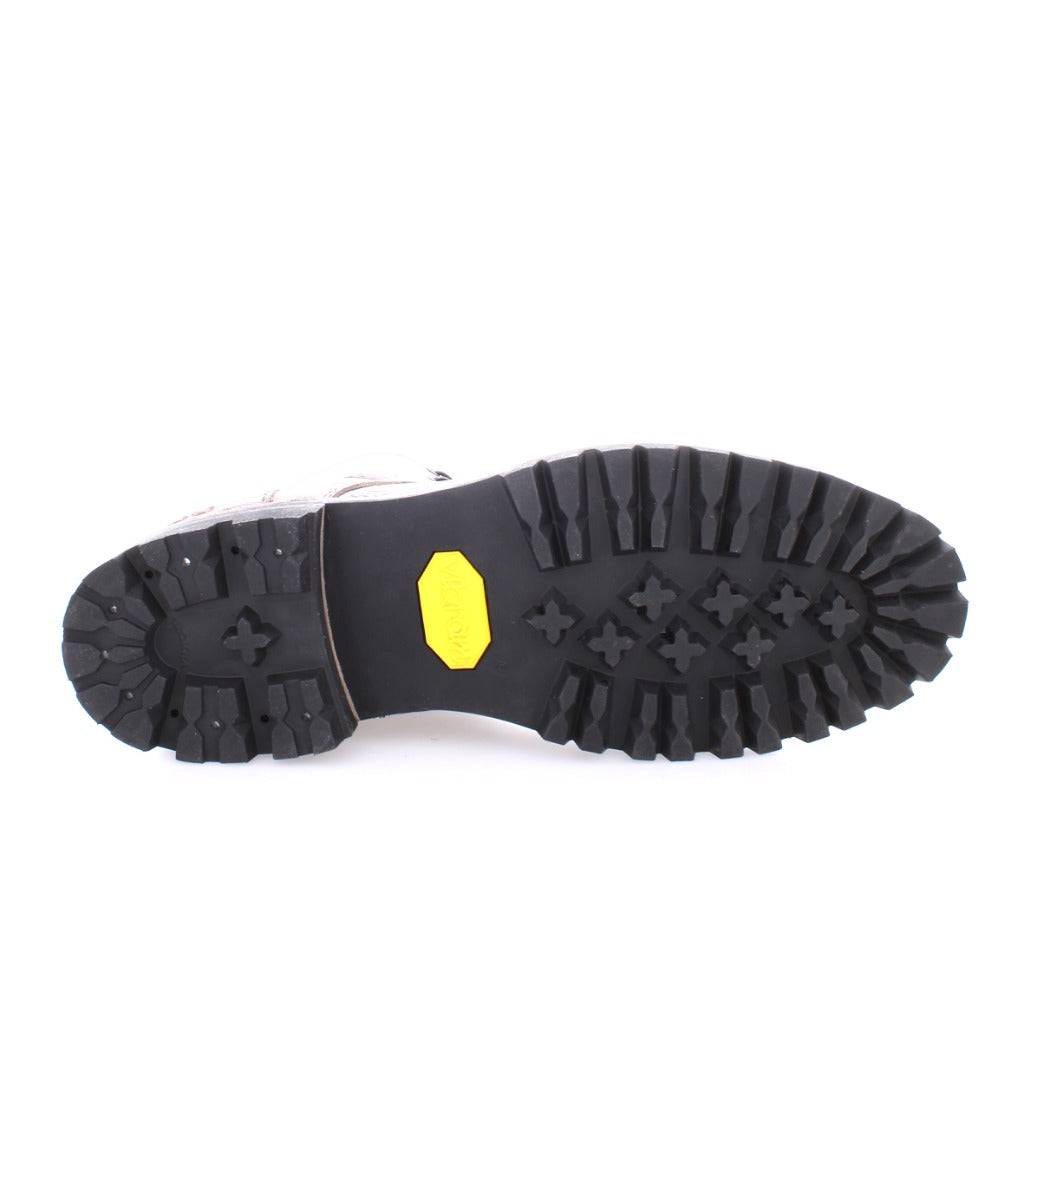 A pair of Protege Trek shoes with yellow soles on a white background, by Bed Stu.